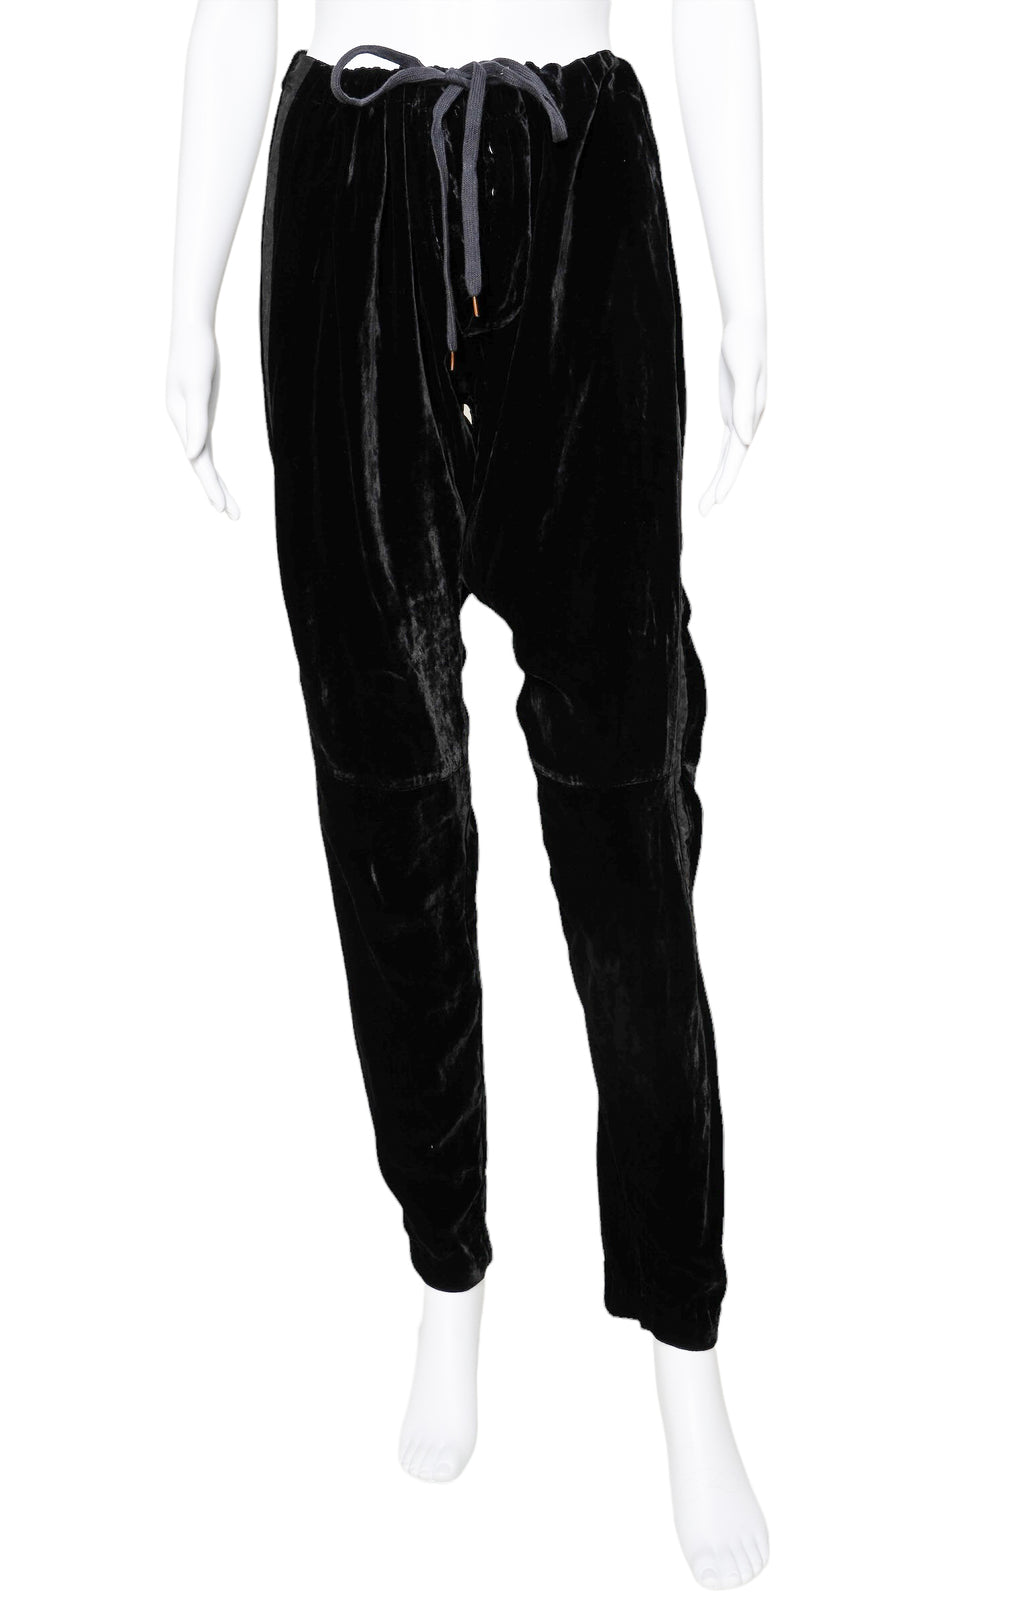 GREG LAUREN (RARE) Pants Size: Marked a size 2, fit like M/L